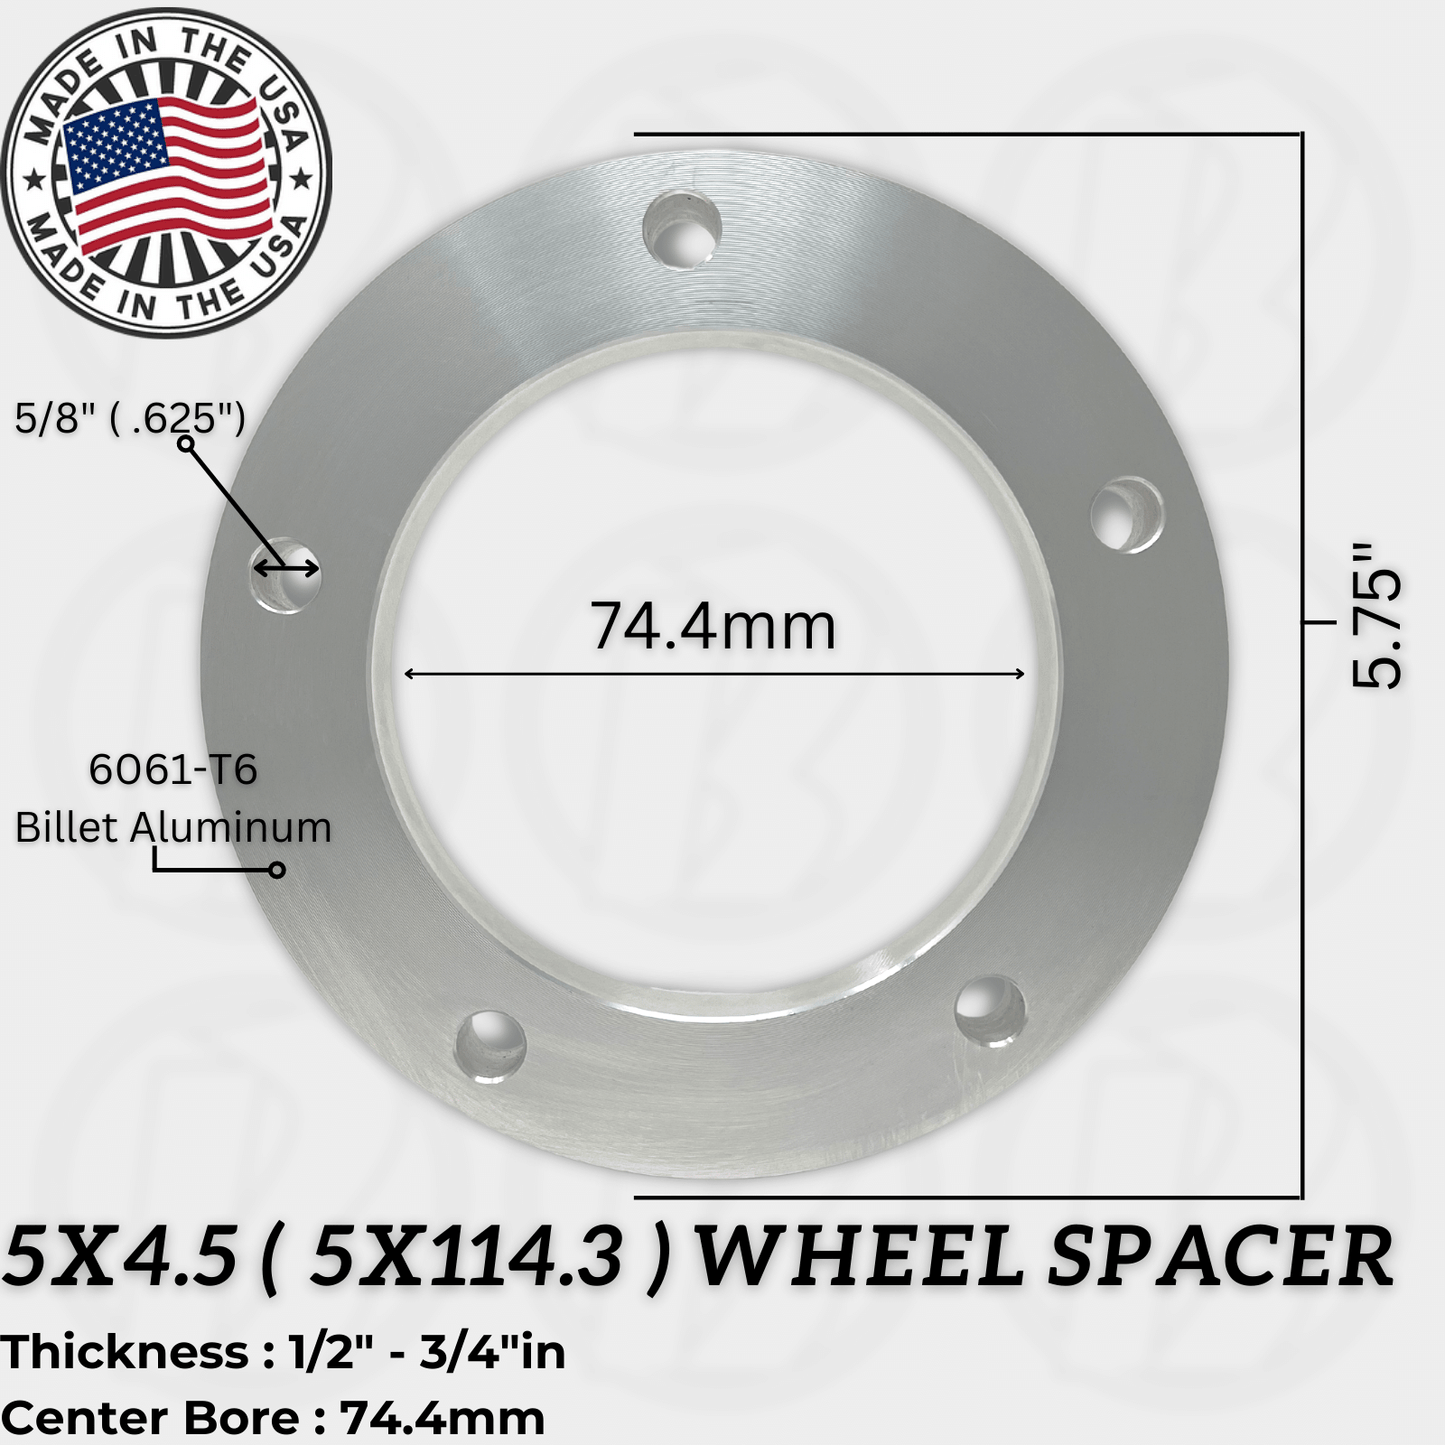 5x4.5 (5x114.3) Wheel Spacer (No Studs) - Thickness: 1/2" - 1.0"